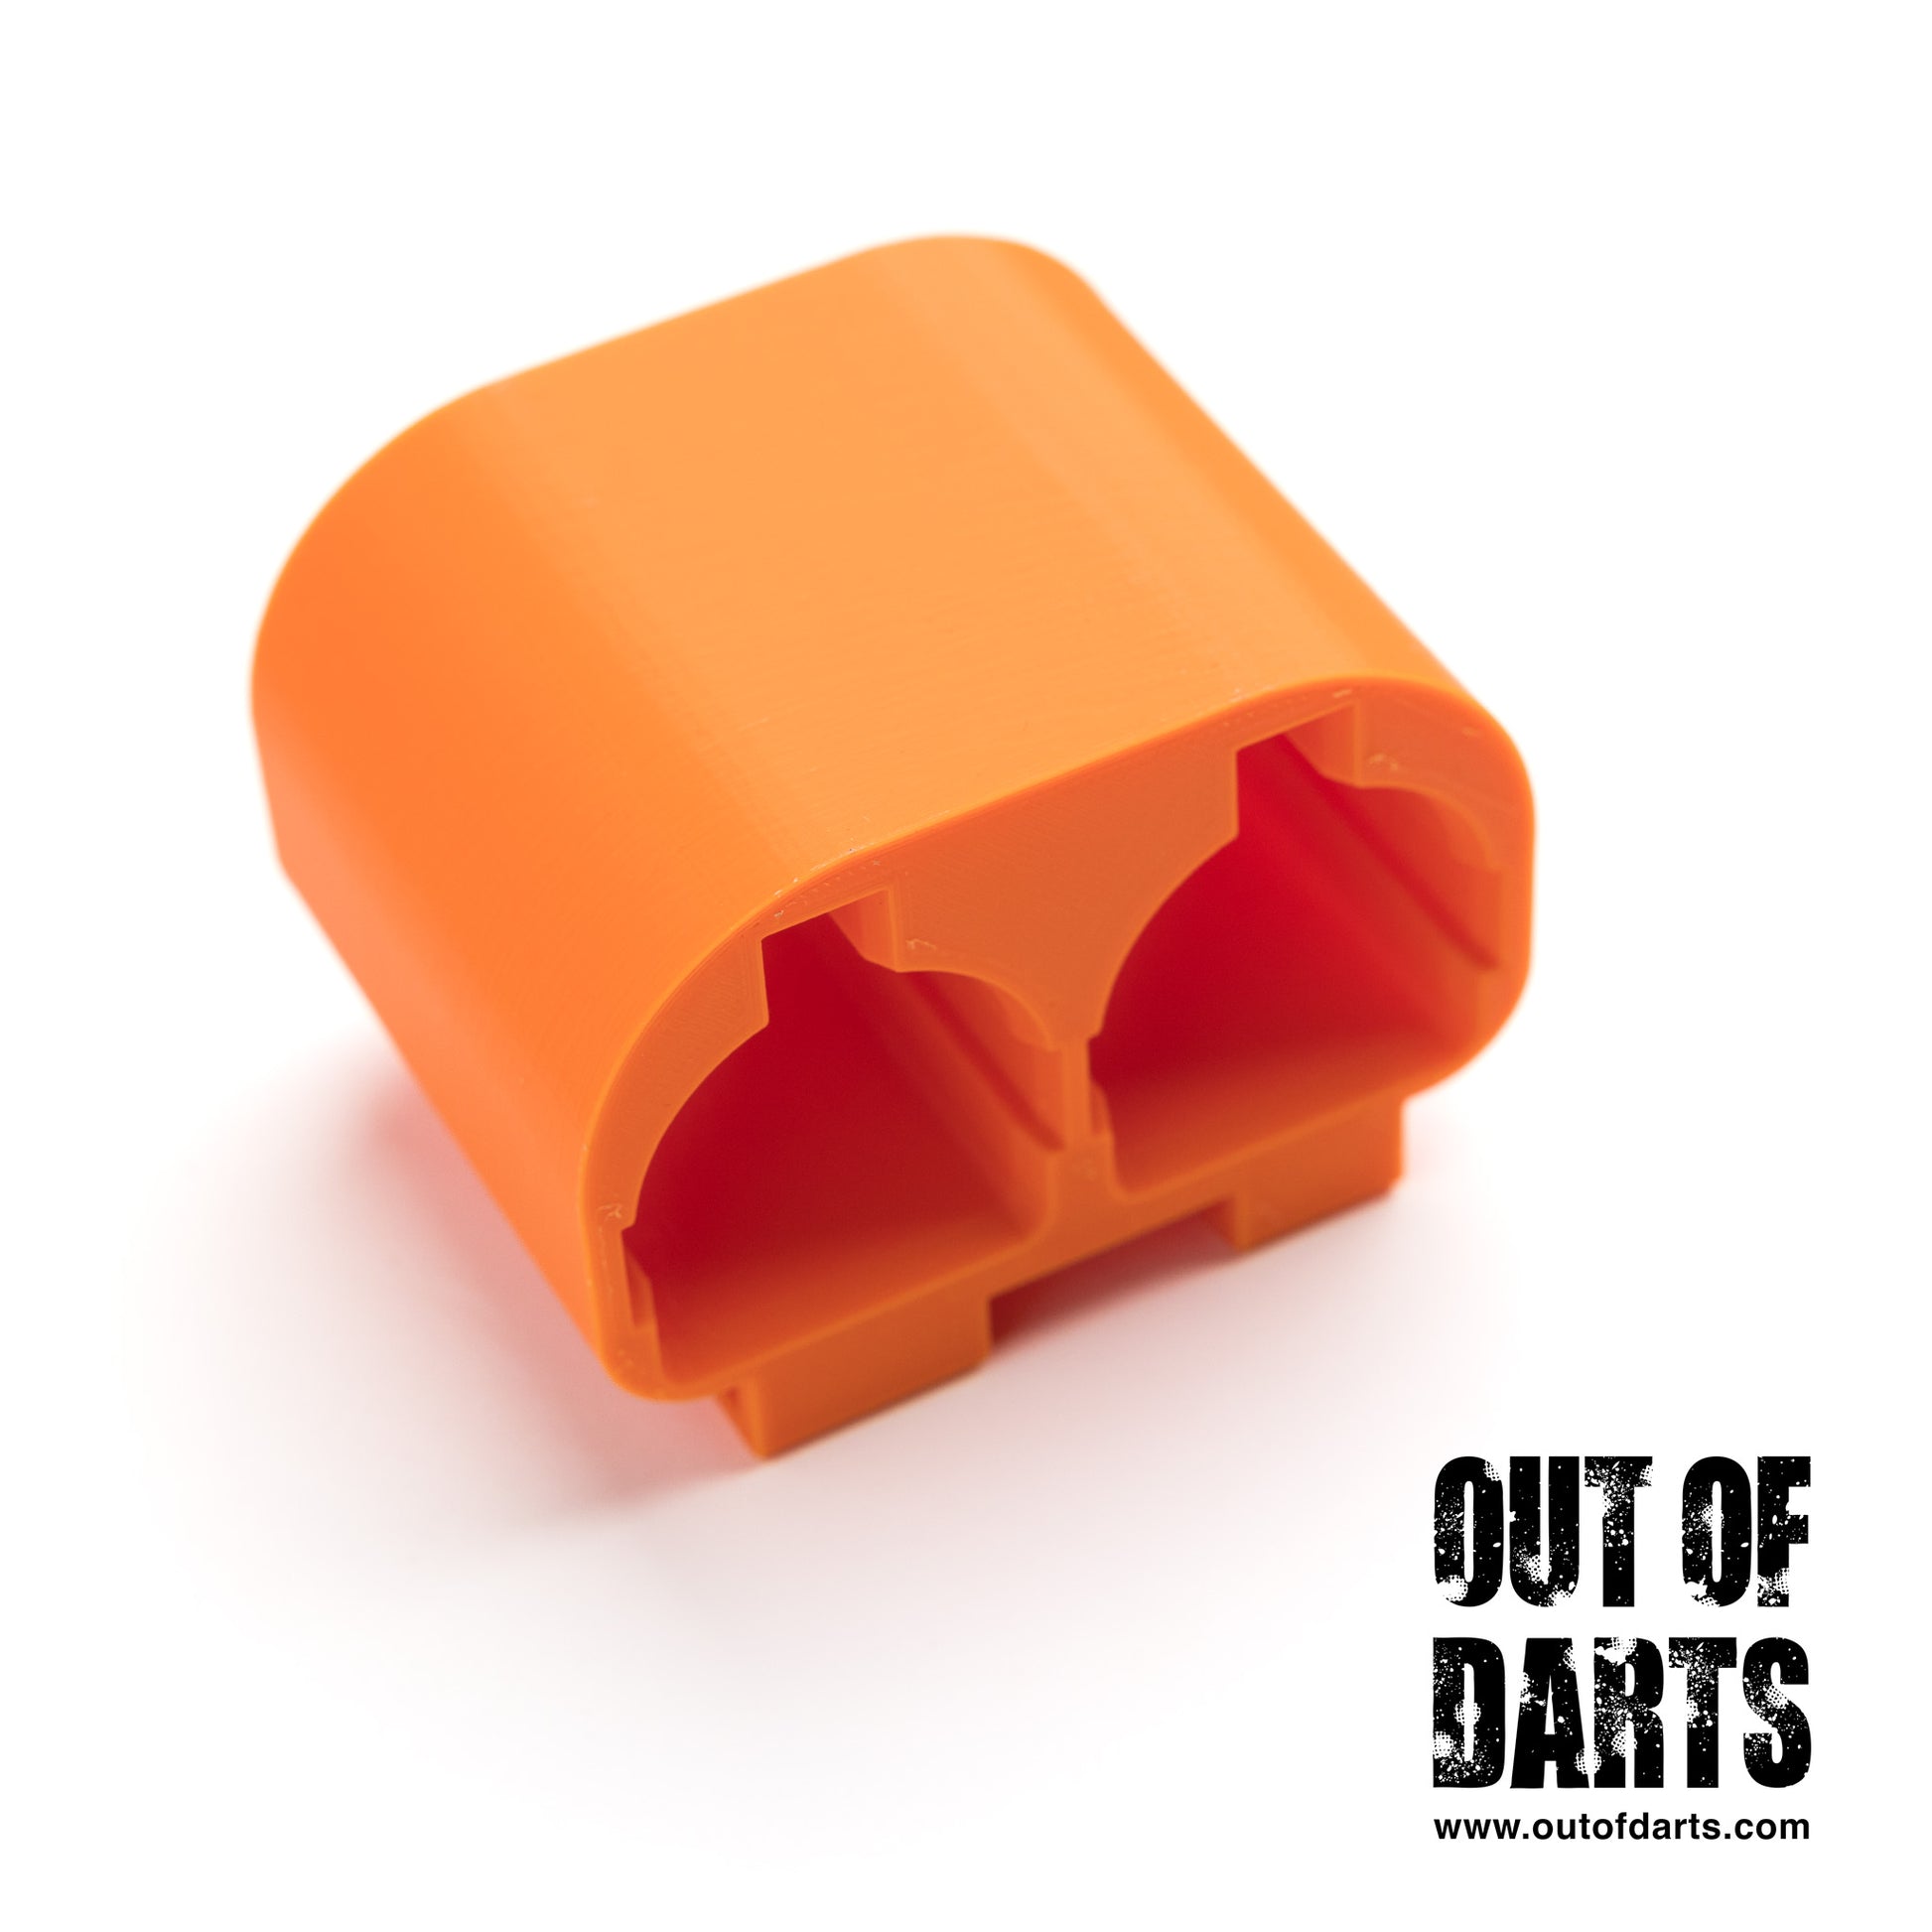 I've designed a tactical snack container. Enjoy. : r/3Dprinting